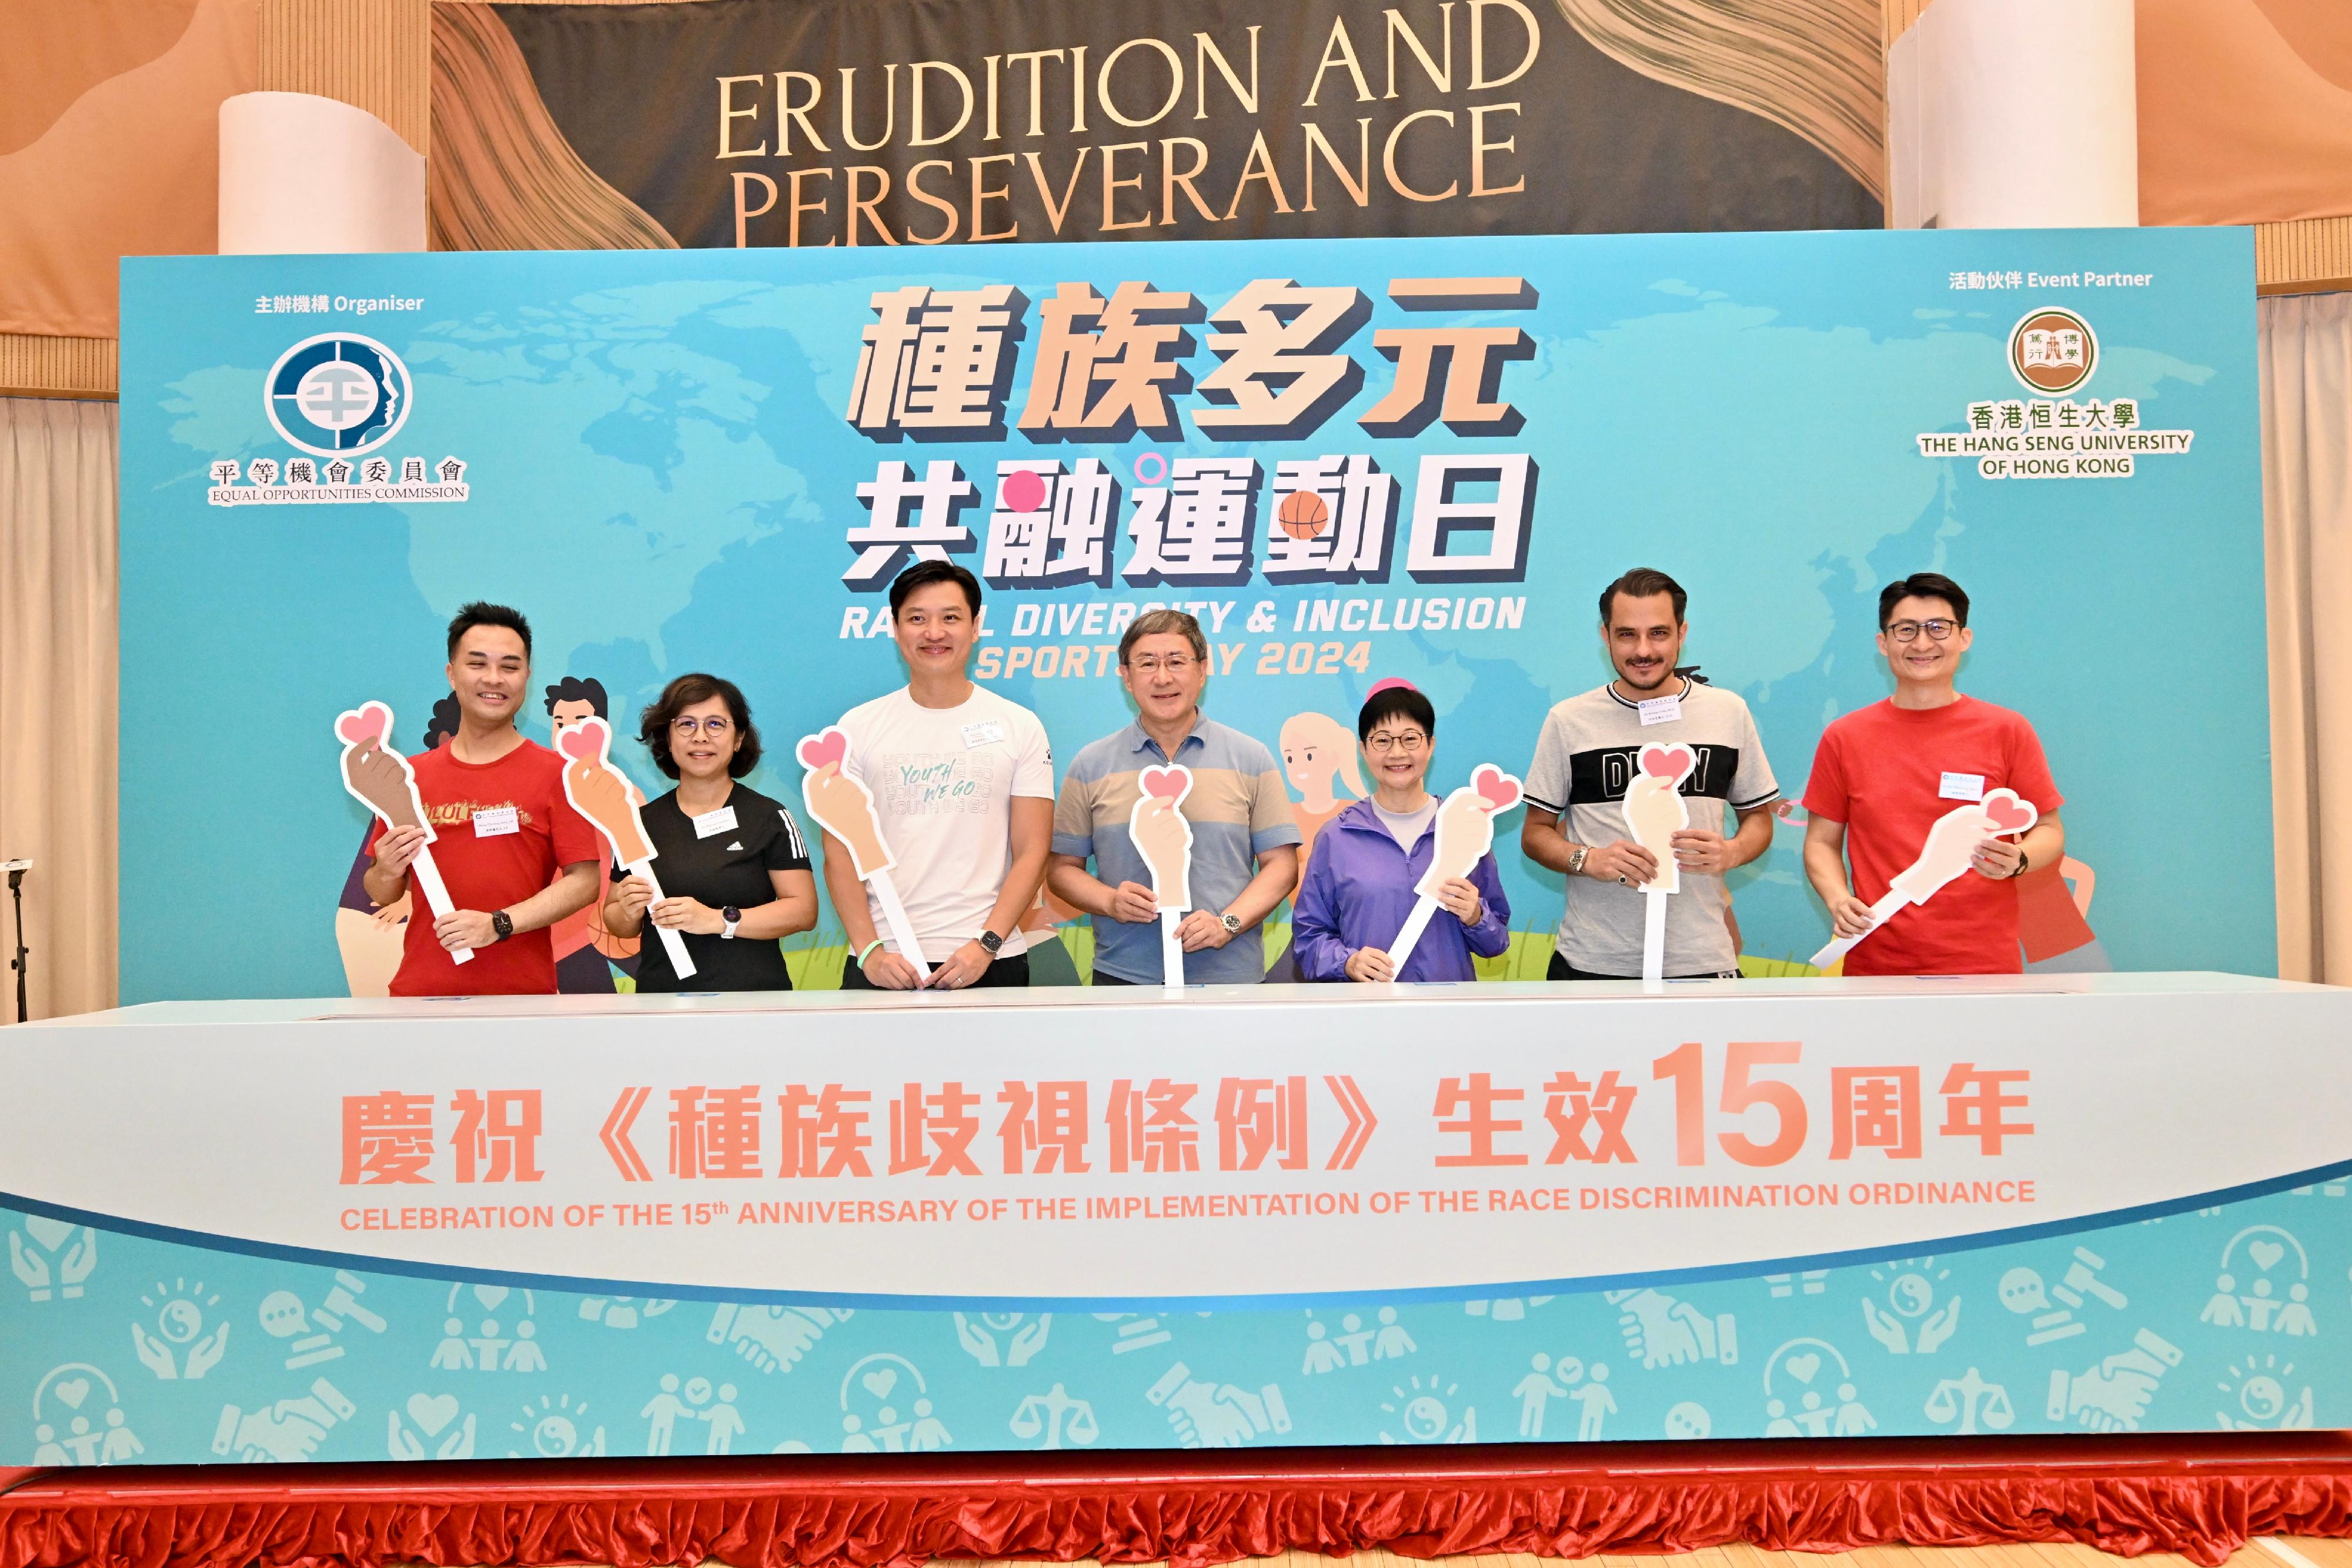 The Deputy Chief Secretary for Administration, Mr Cheuk Wing-hing, attended the Opening Ceremony of the Racial Diversity and Inclusion Sports Day 2024 today (April 21). Photo shows Mr Cheuk (centre), the Chairperson of the Equal Opportunities Commission, Ms Linda Lam (third right), Legislative Council member Mr Vincent Cheng (third left) and other guests at the ceremony.